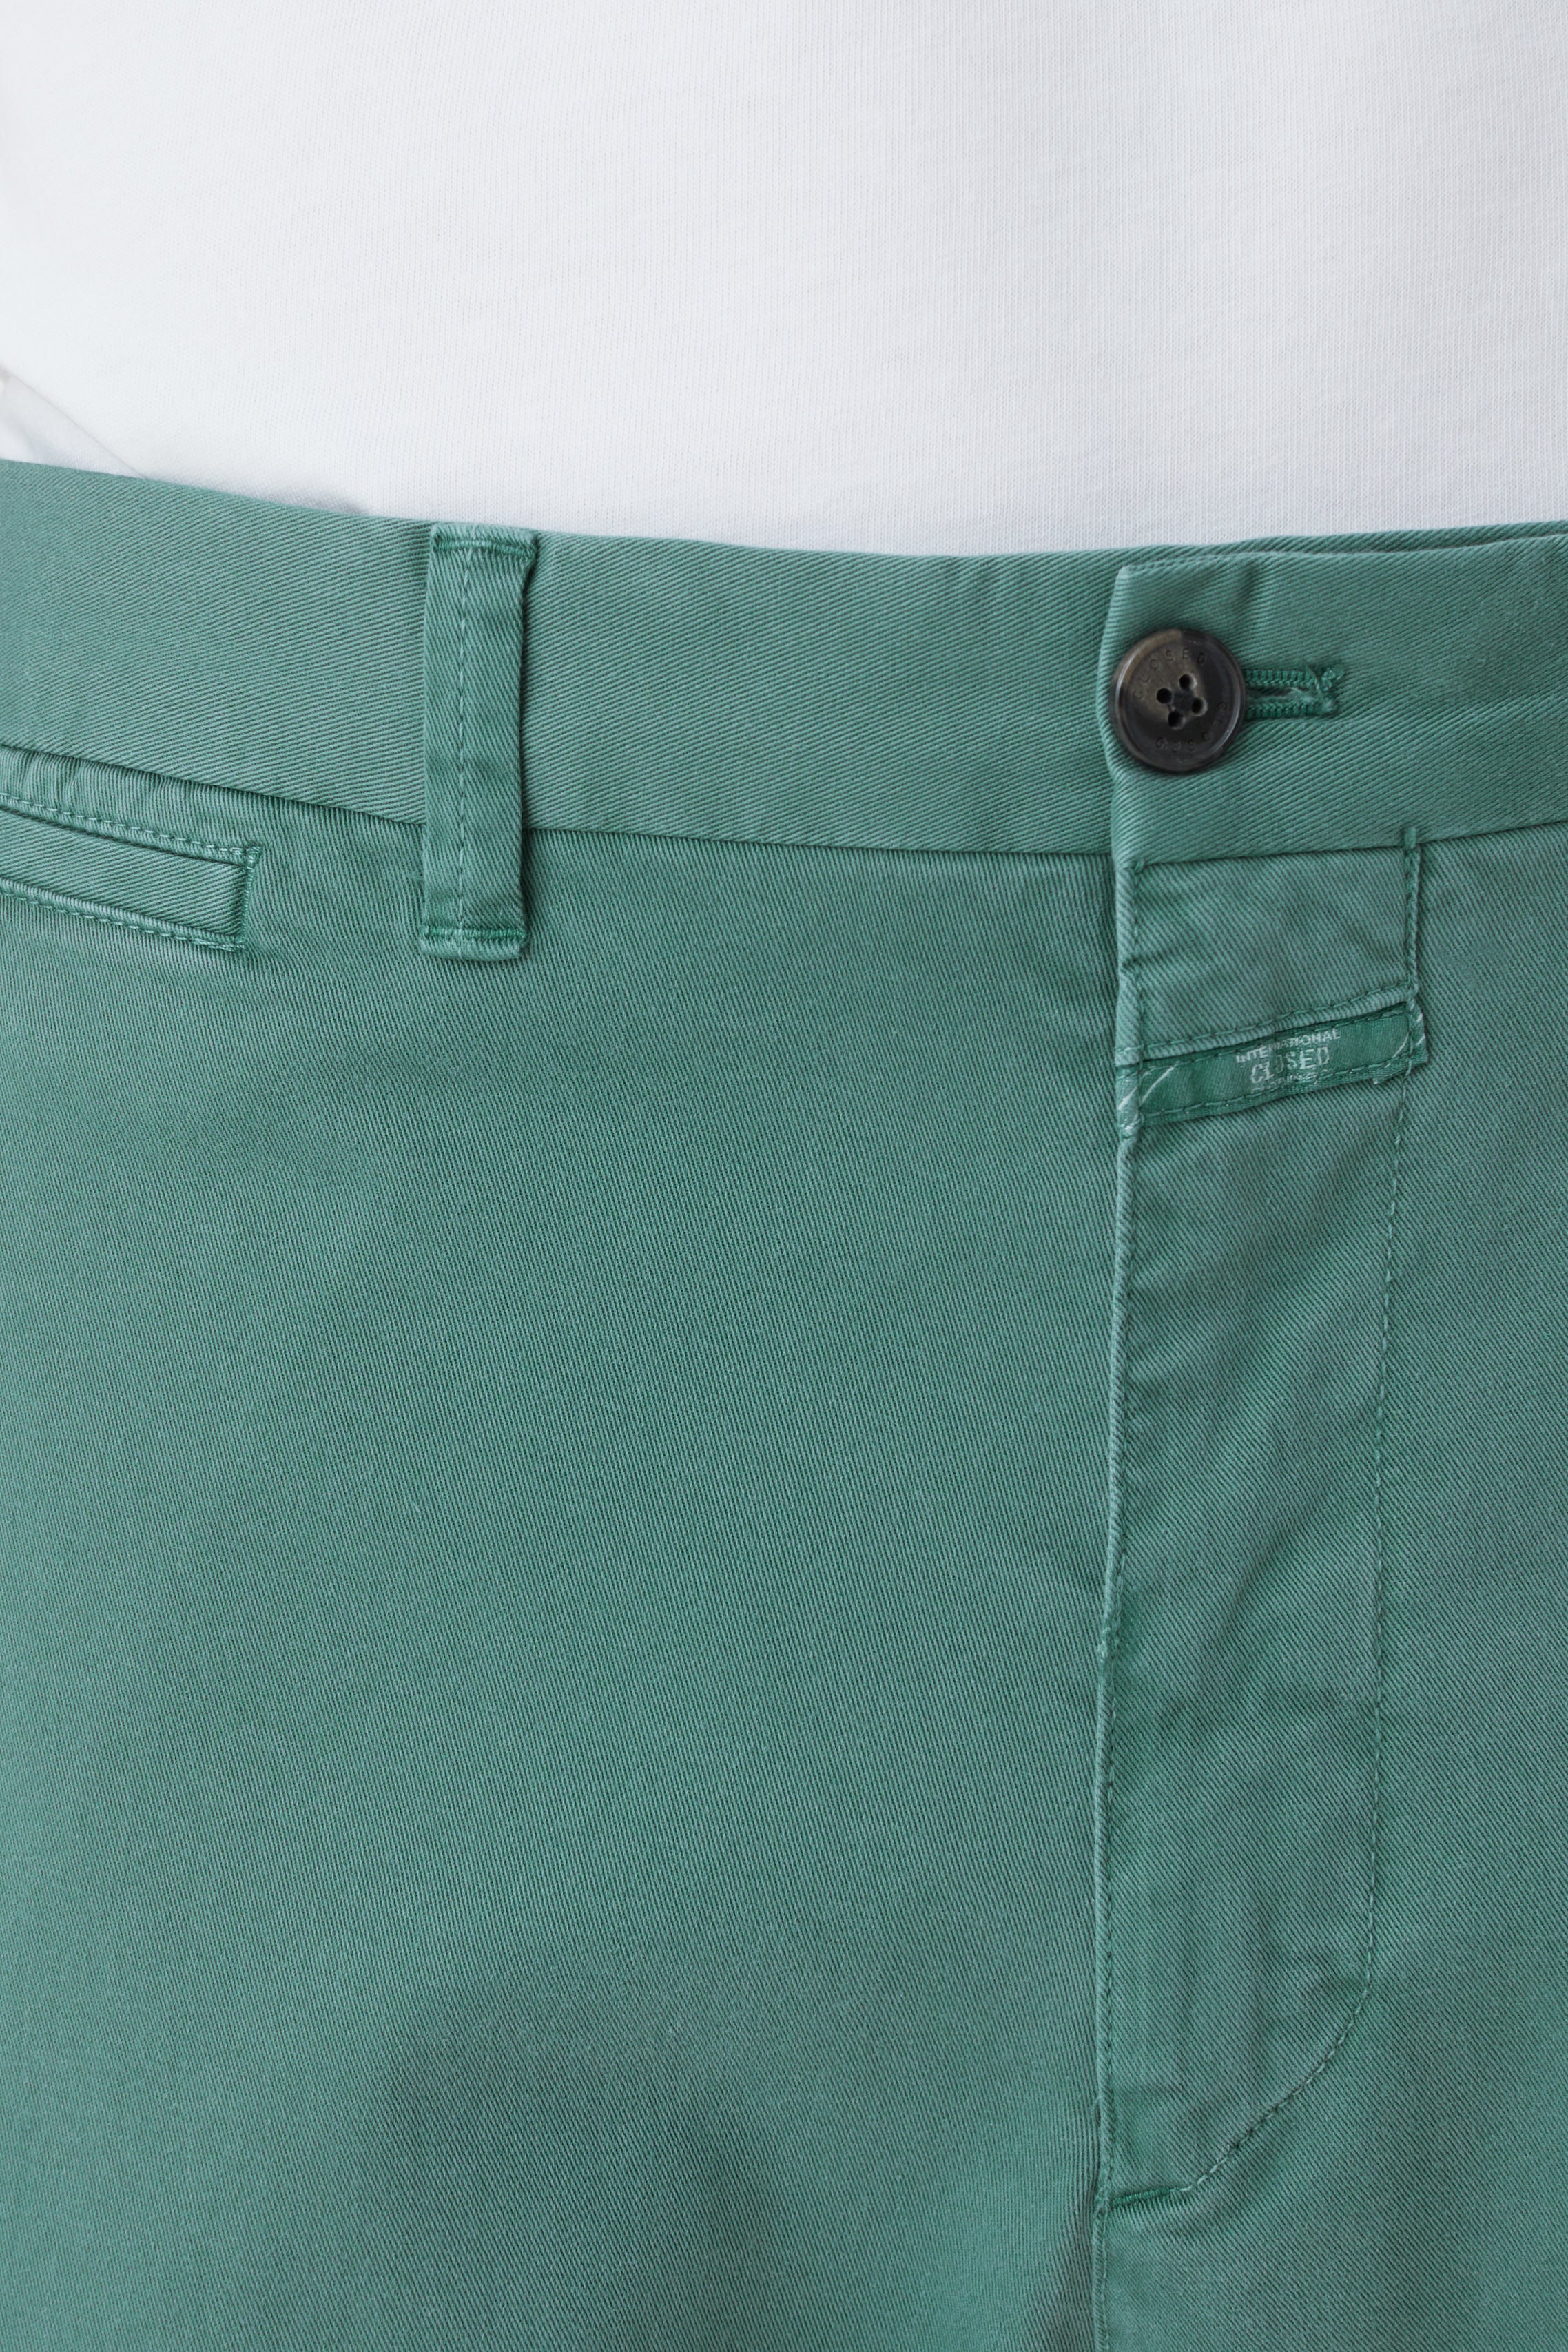 CLOSED-OUTLET-SALE-STYLE-NAME-TACOMA-TAPERED-PANTS-Hosen-ARCHIVE-COLLECTION-3_9f1e8206-febc-4de7-bdc3-fbde96eb60c8.jpg